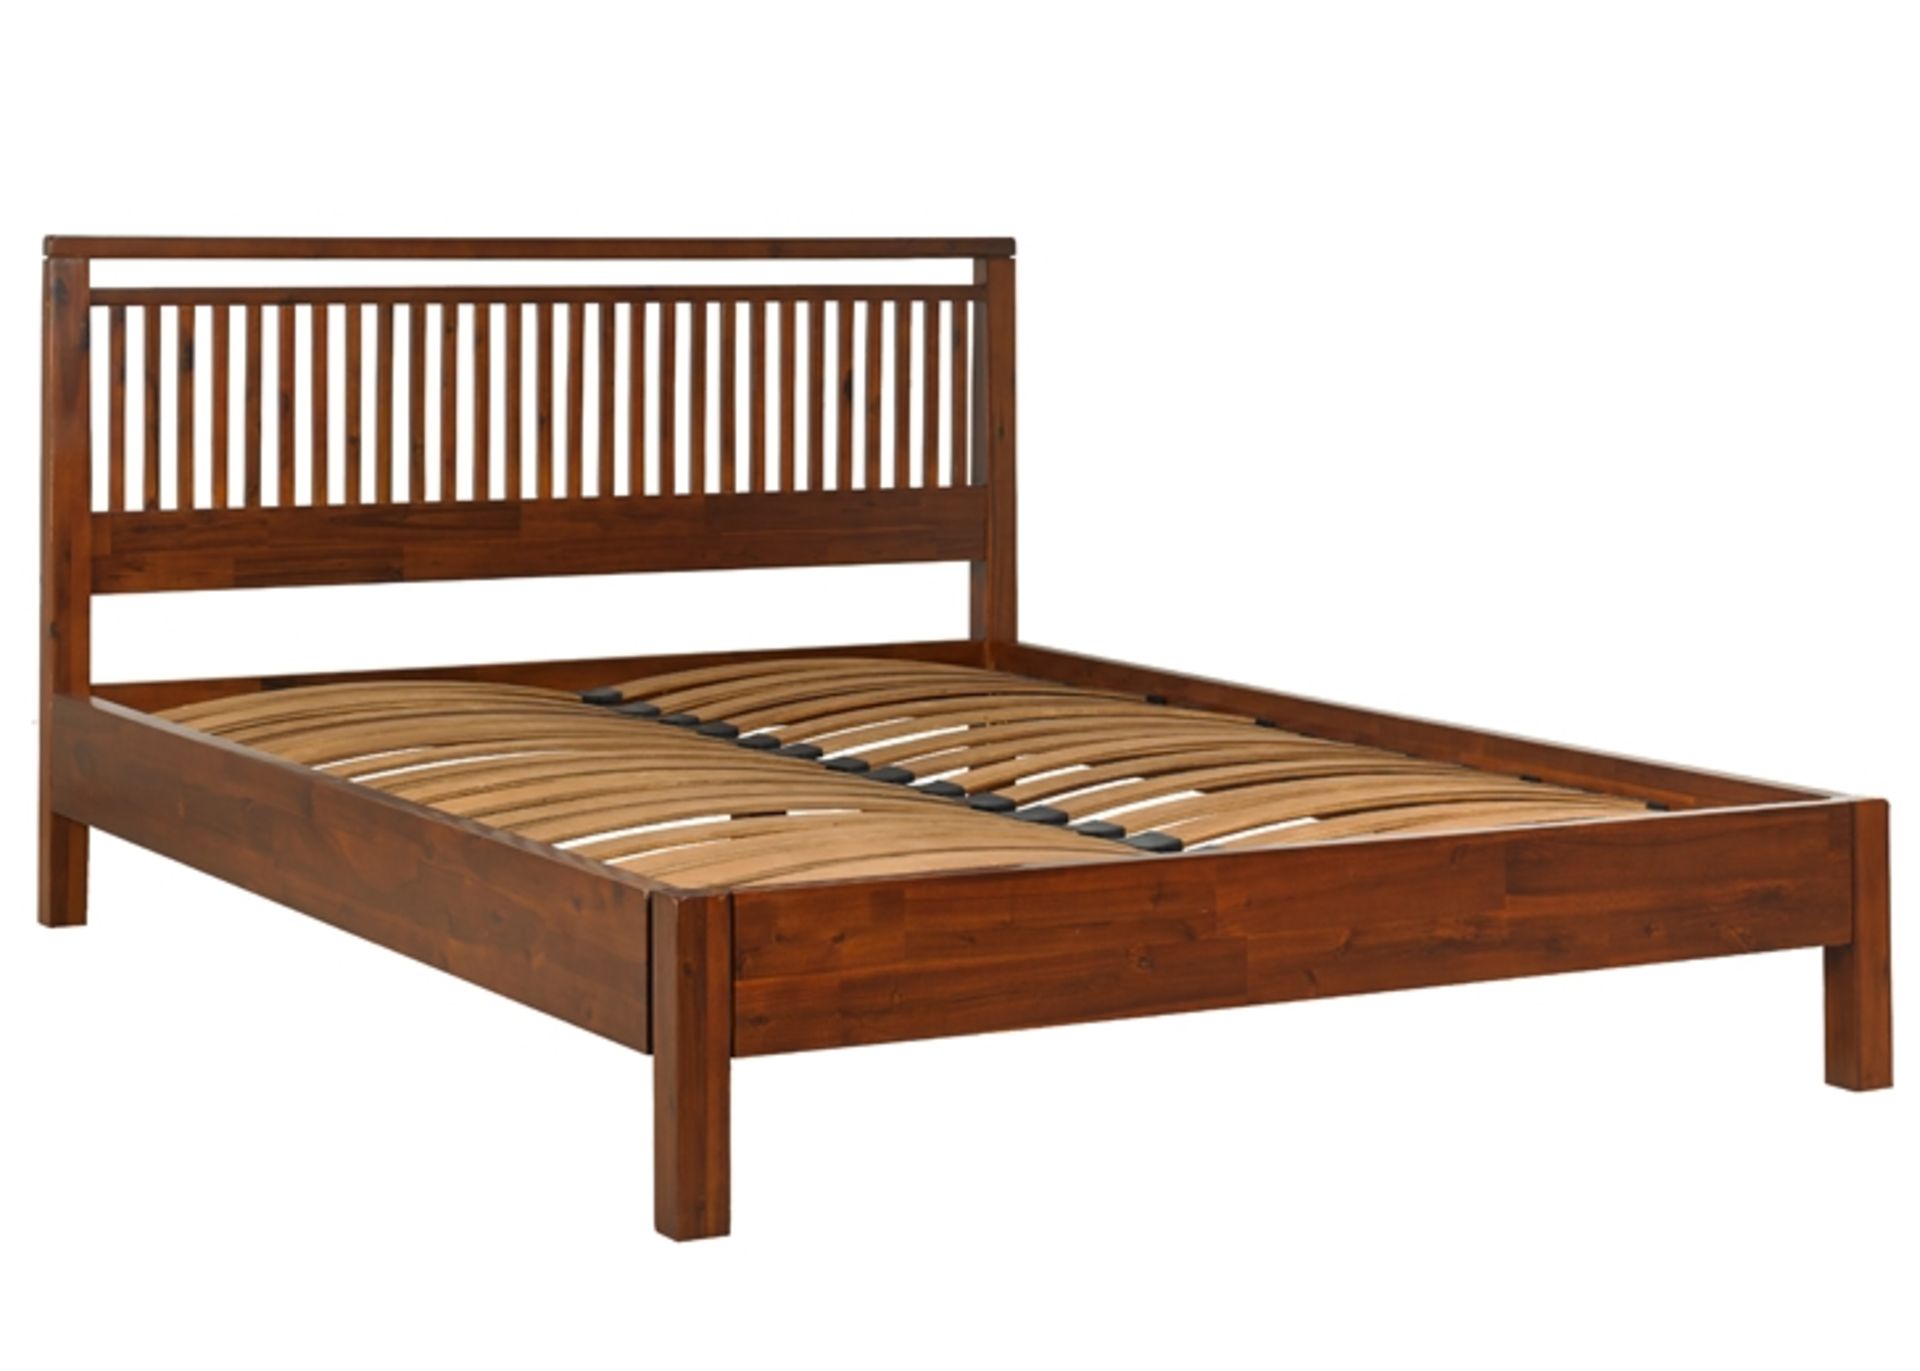 1 x Mark Webster Korutla 6ft King Size Bed Frame - Beautifully Crafted From Solid Acacia Wood - - Image 2 of 3